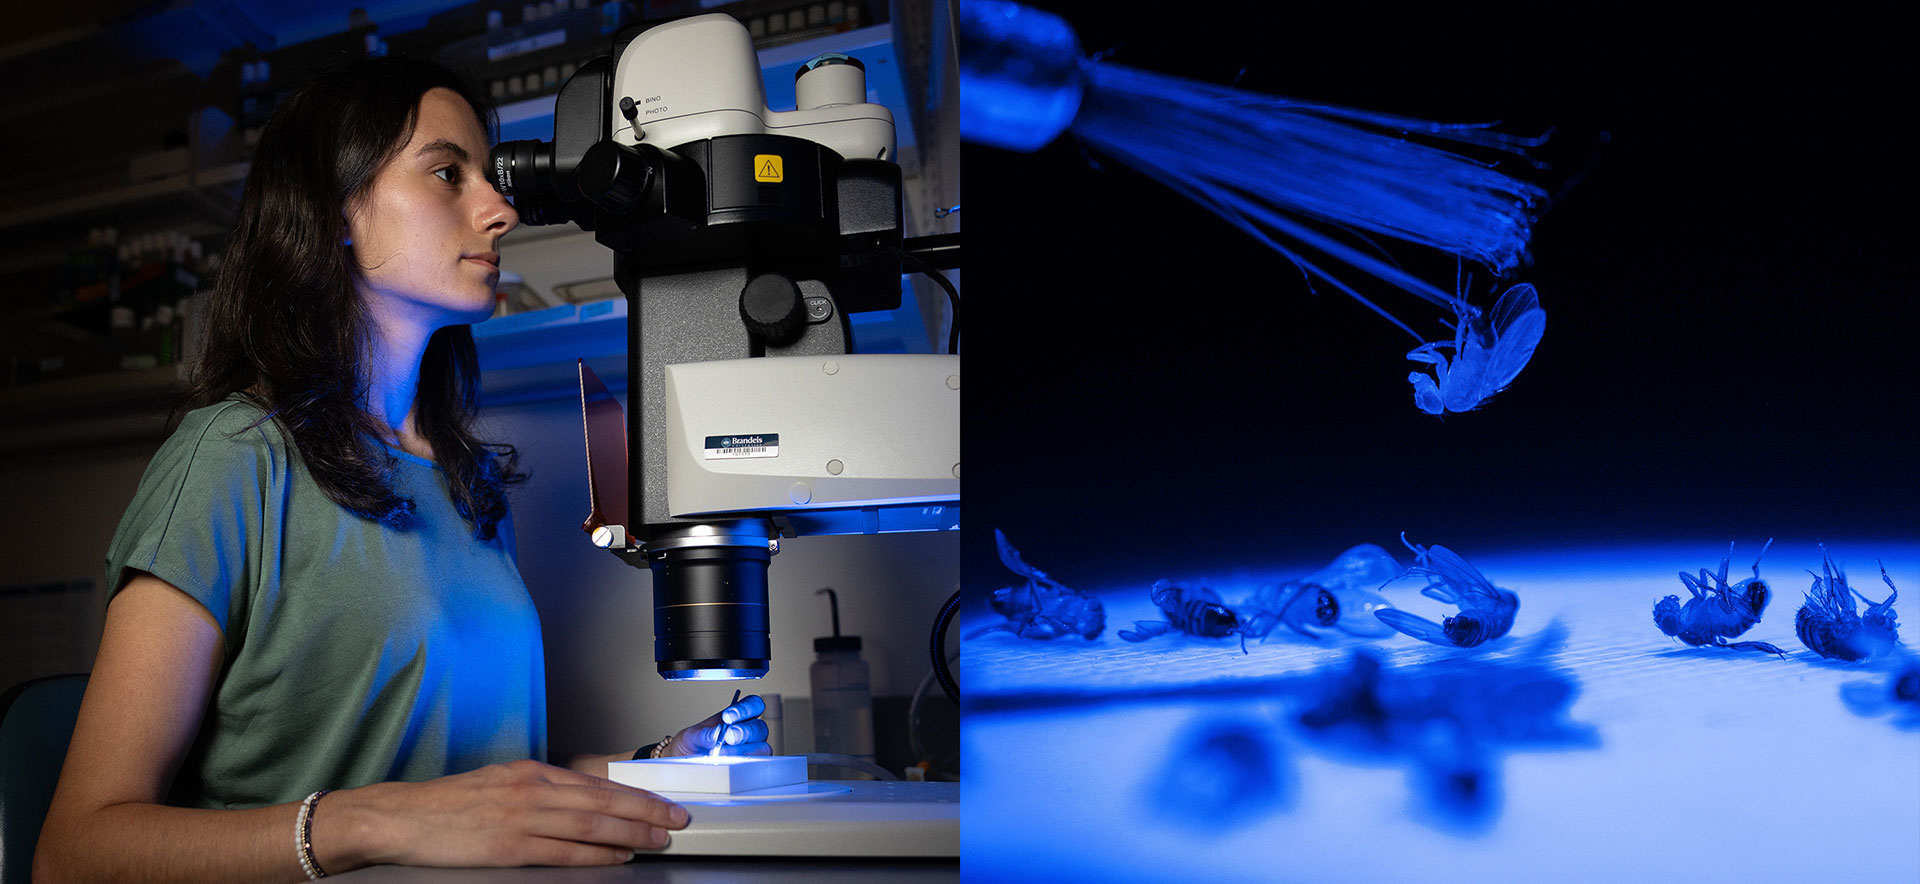 A diptych photo where the left image is a biology student looking through a microscope in a lab and the right image shows the microscope's view of fruit flies.